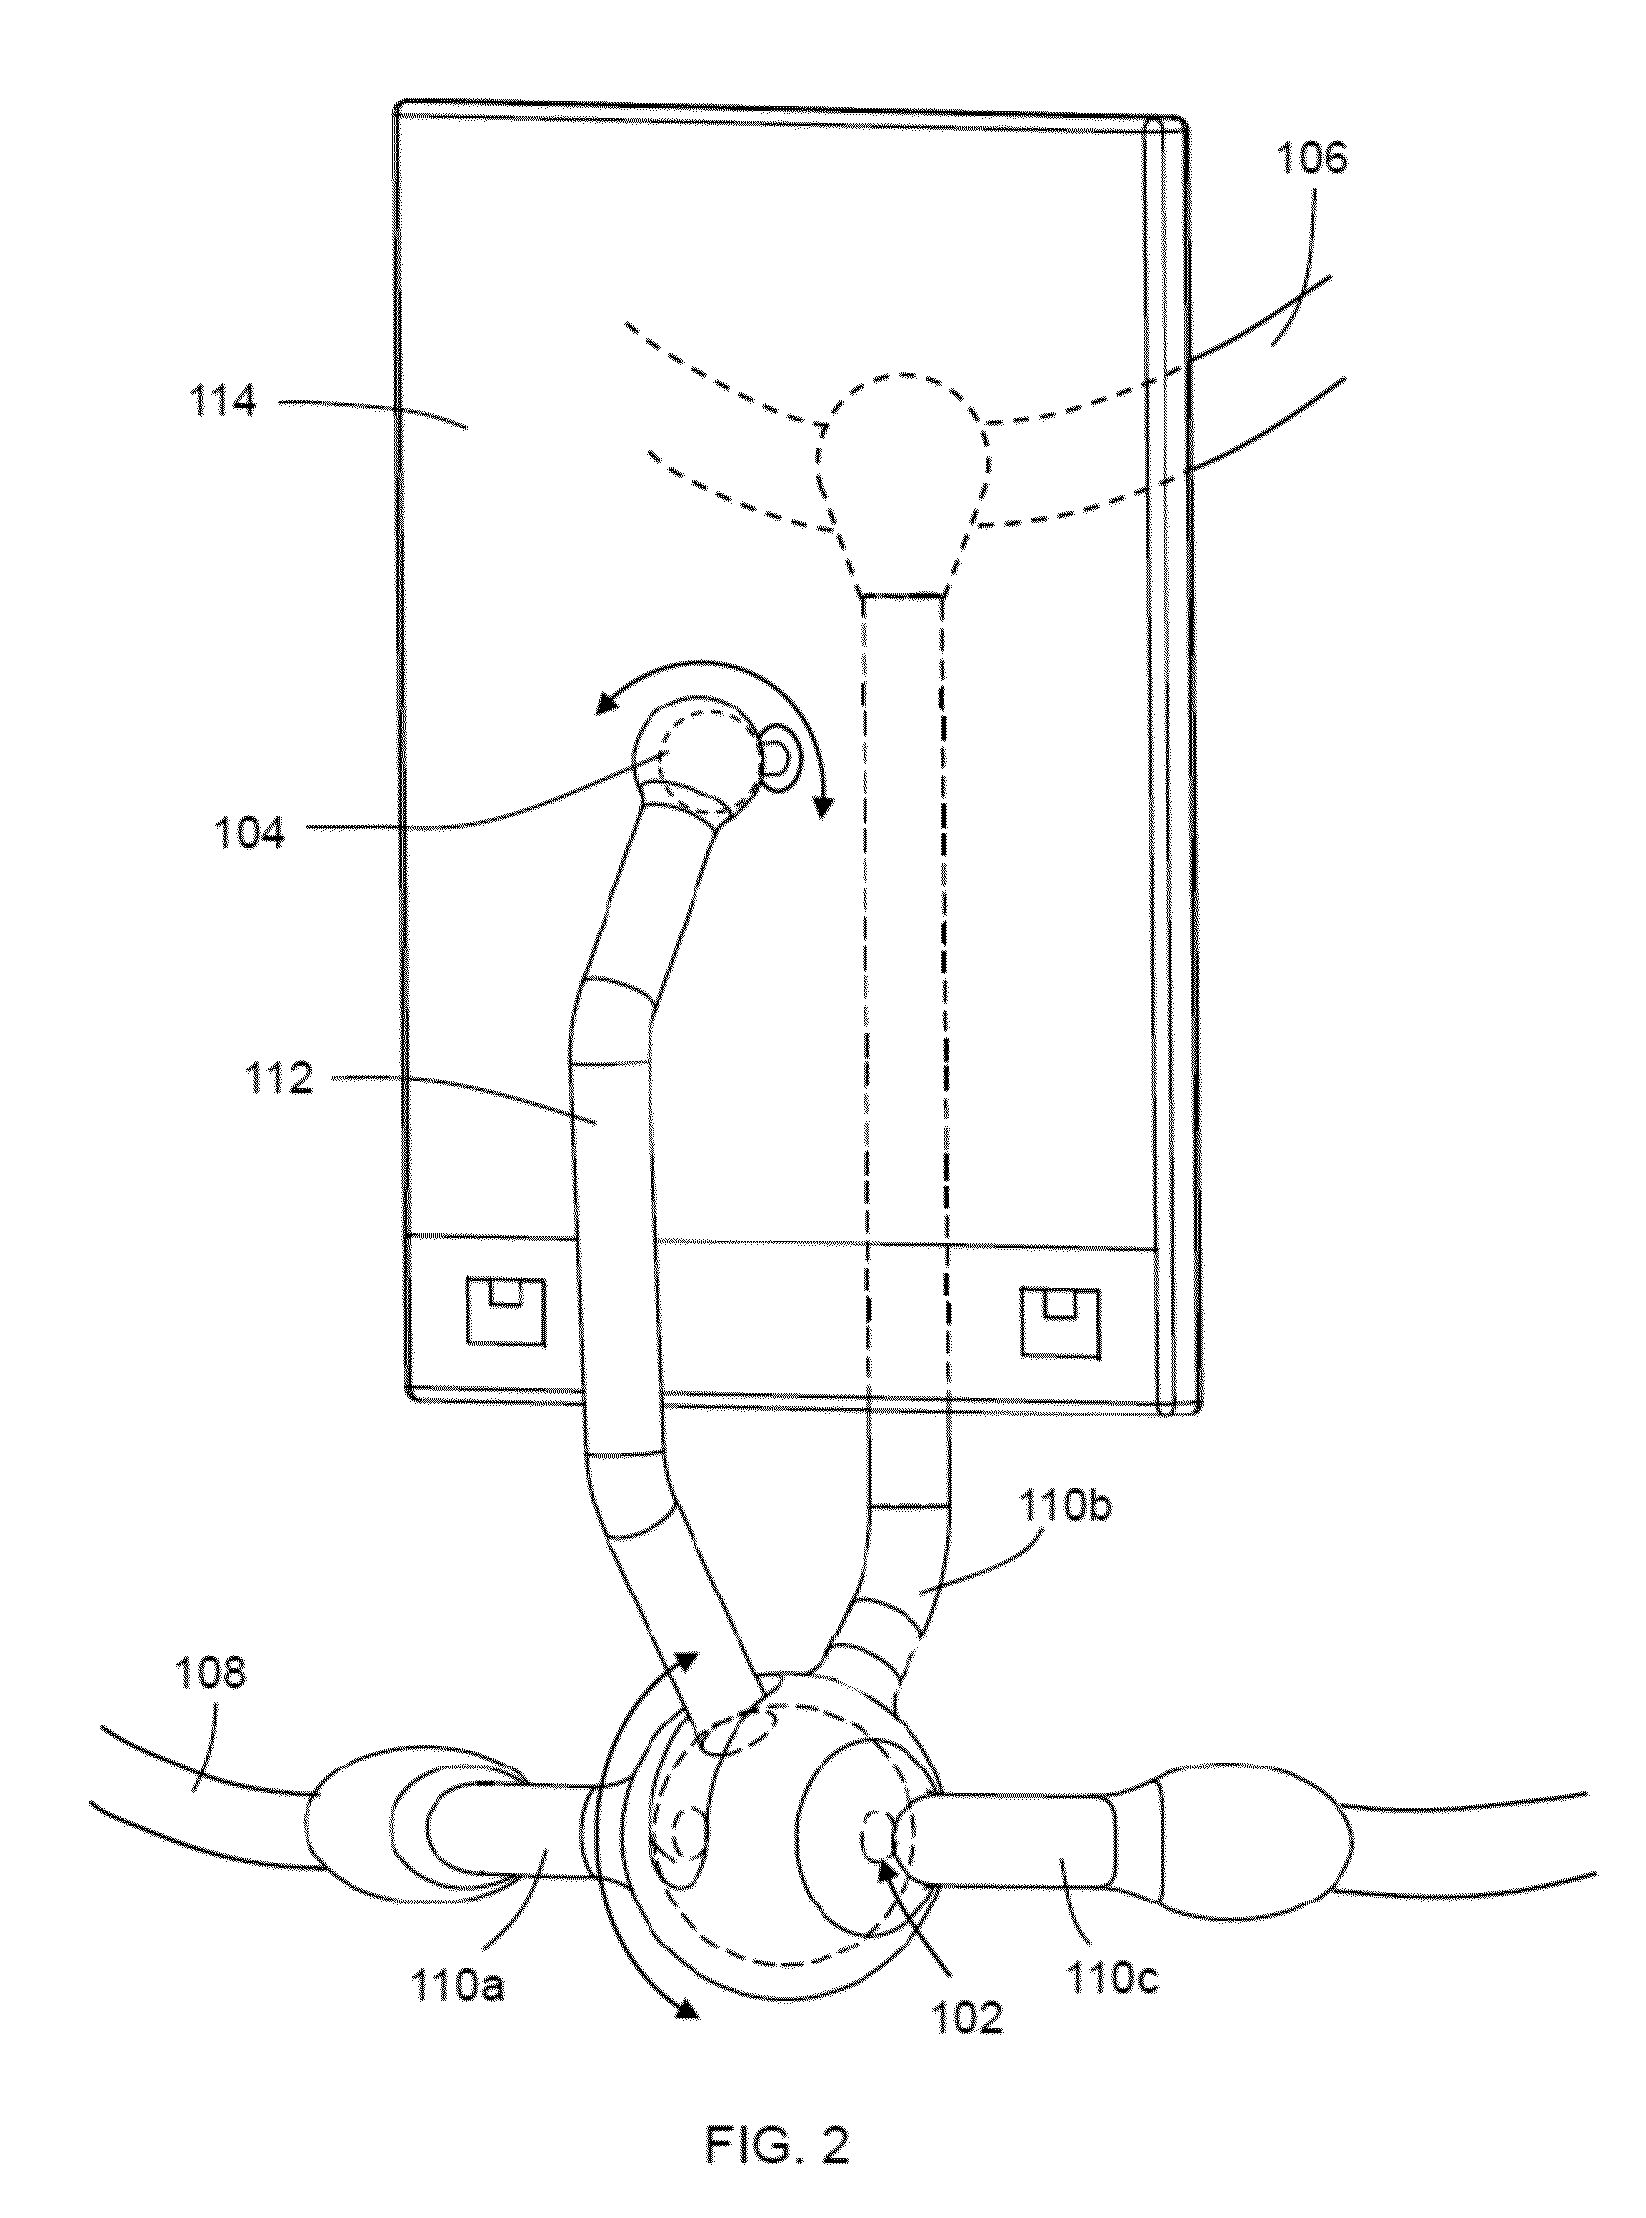 Method and apparatus for attaching a personal electronic device